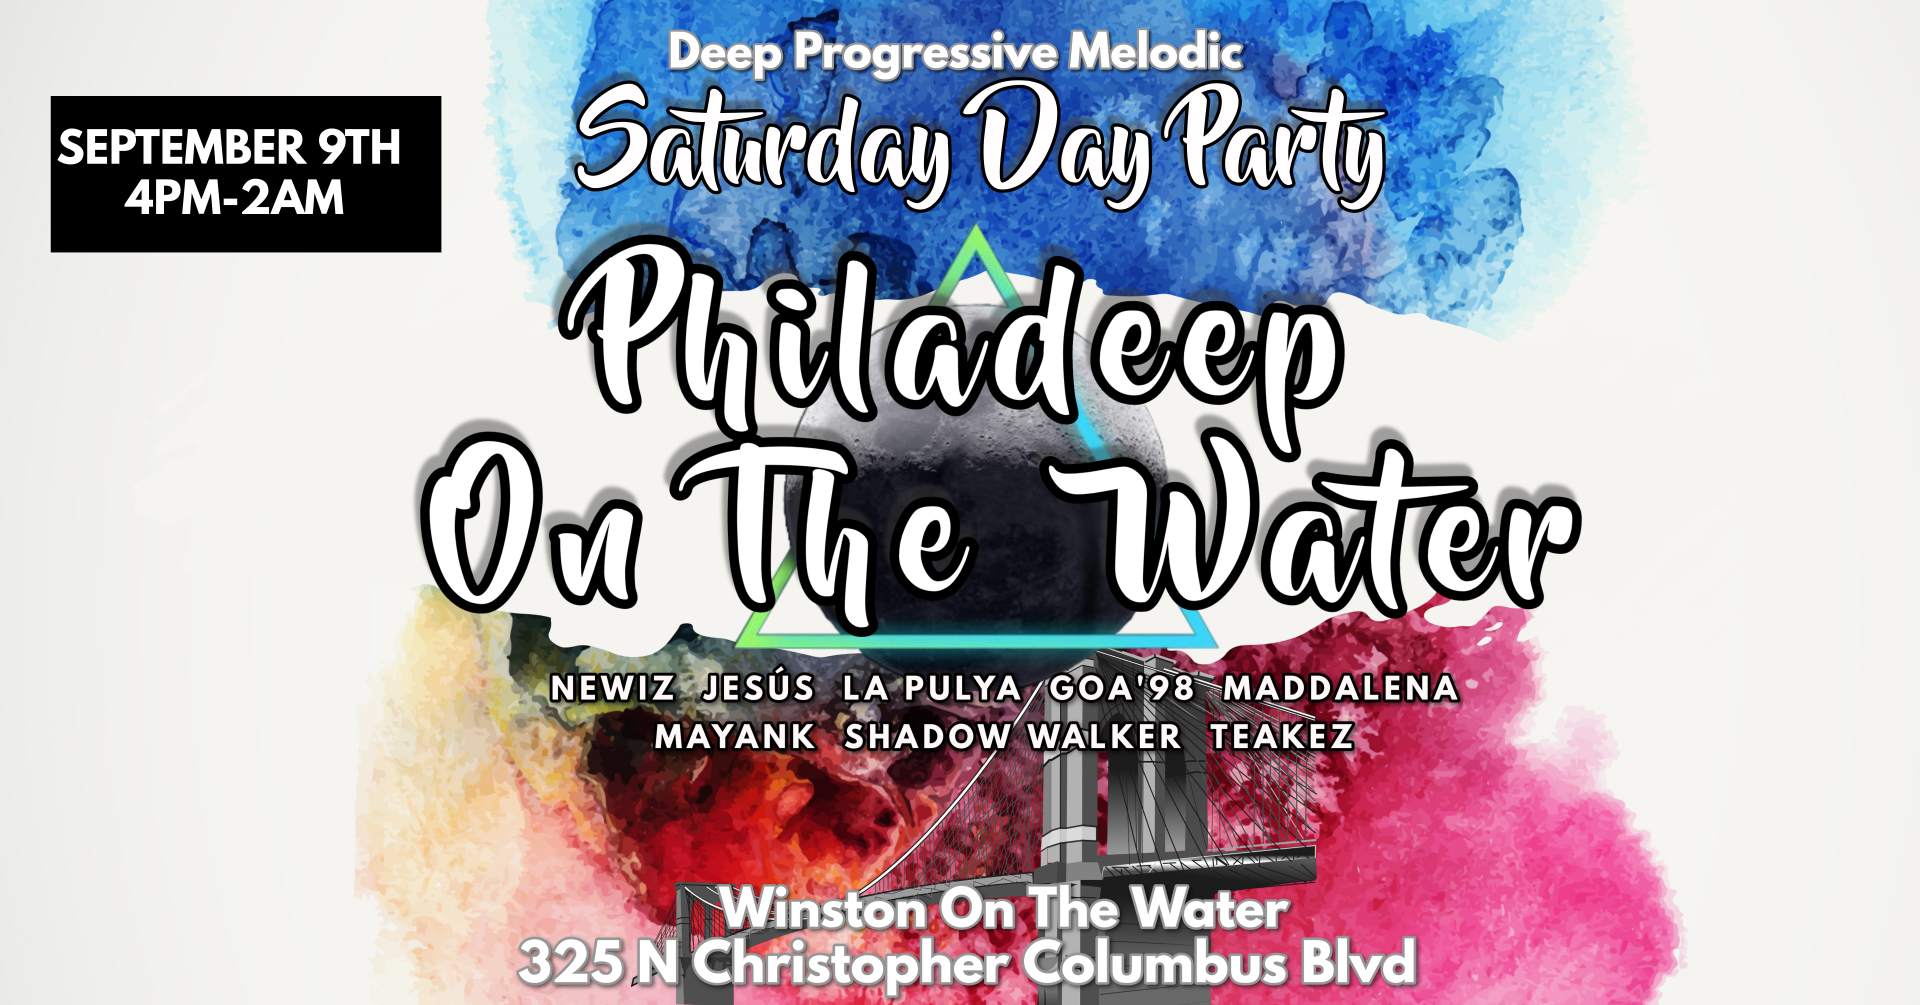 [CANCELLED] Philadeep on The Water - Página frontal